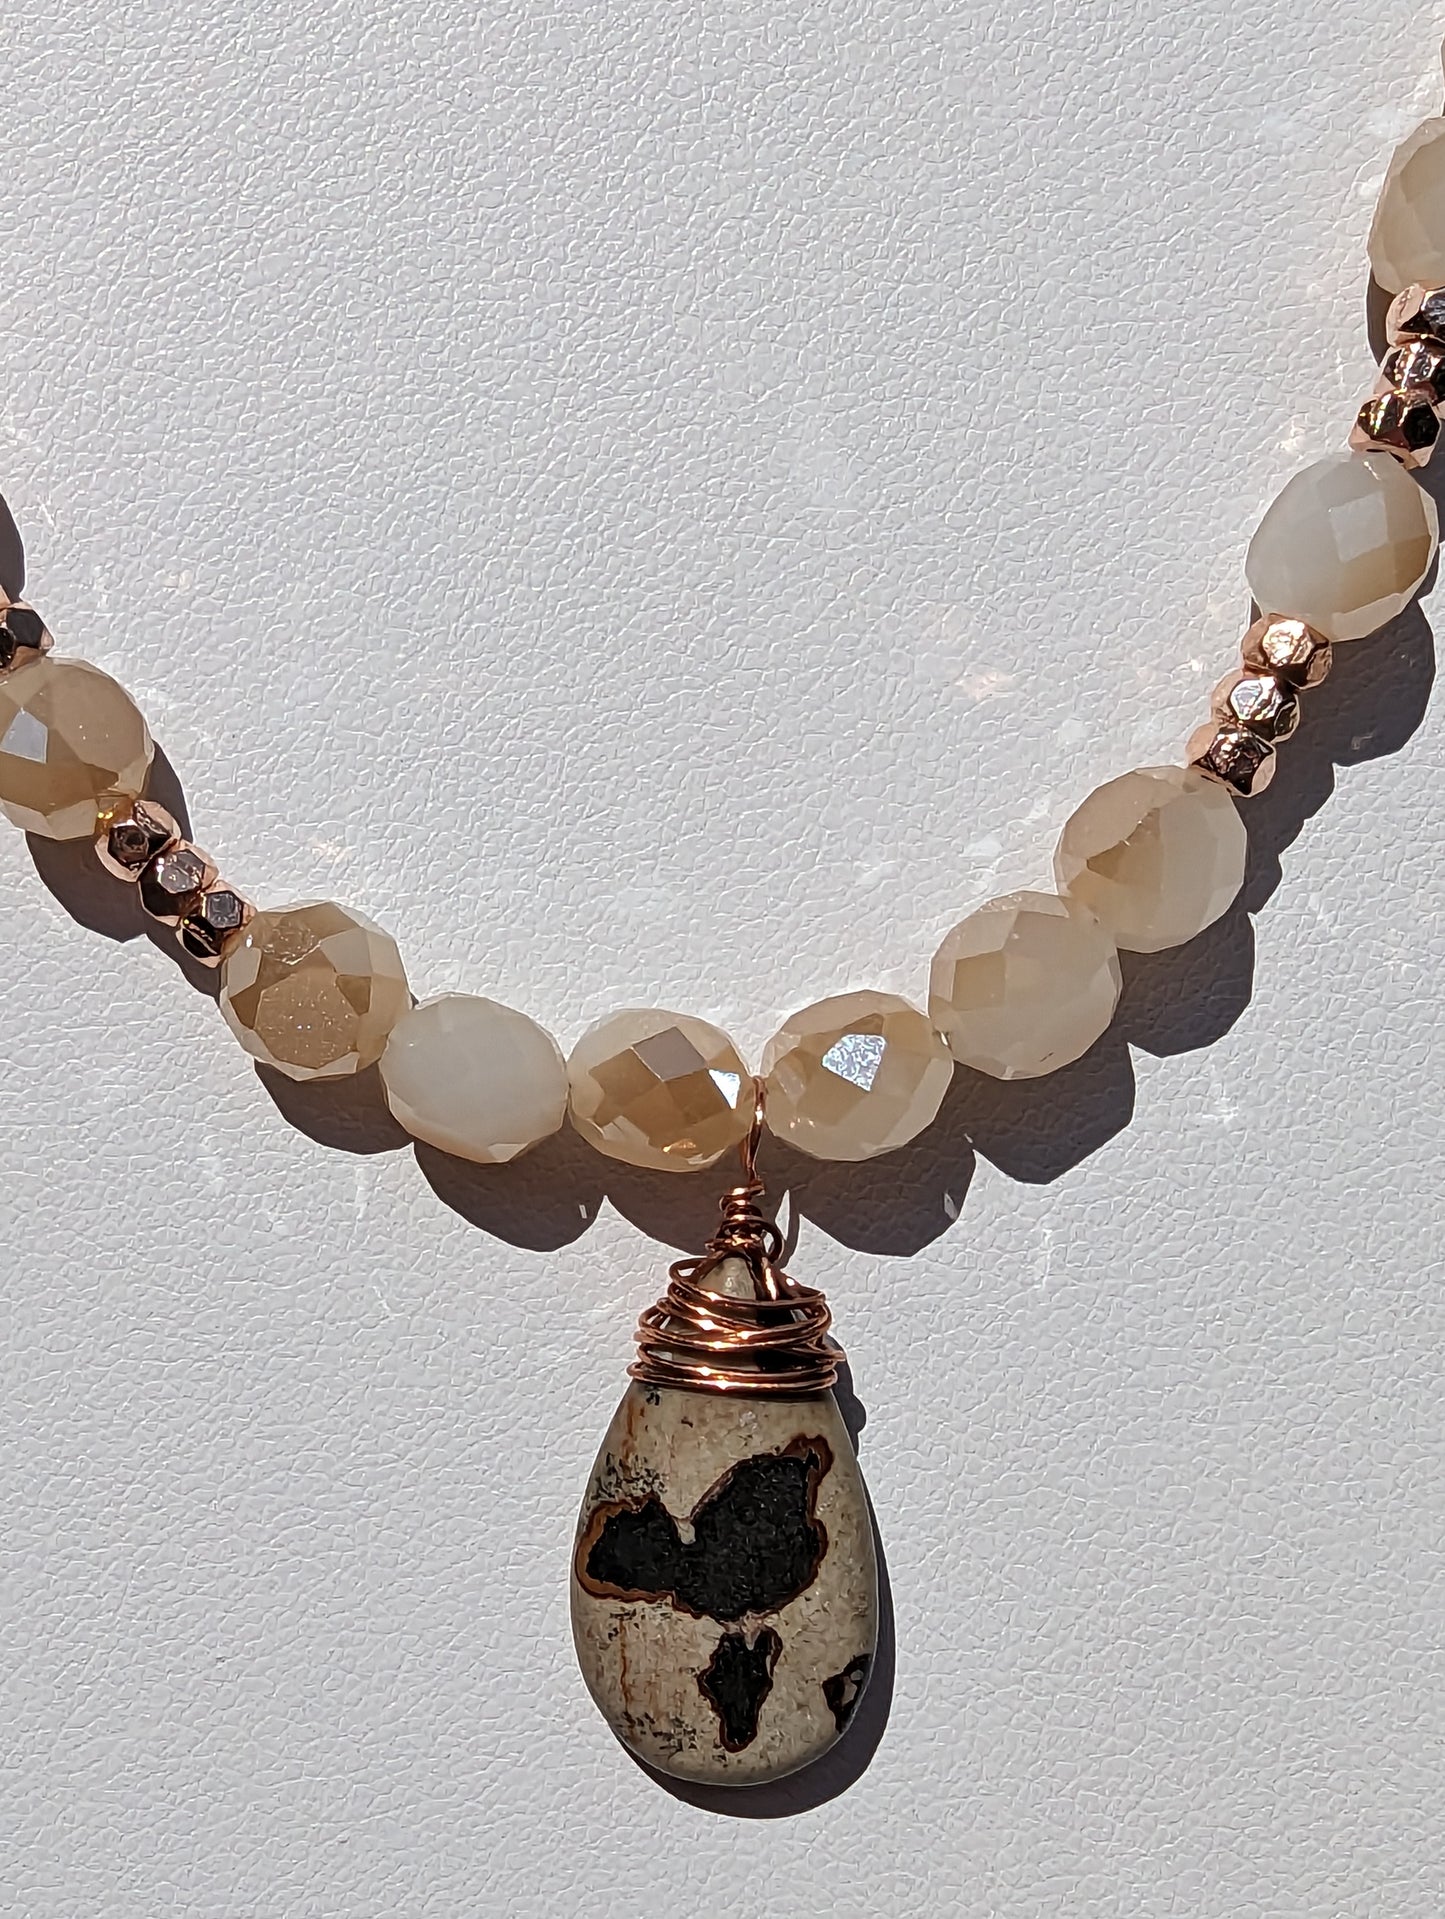 Wire-wrapped Painted Jasper Pendant on Beaded Necklace